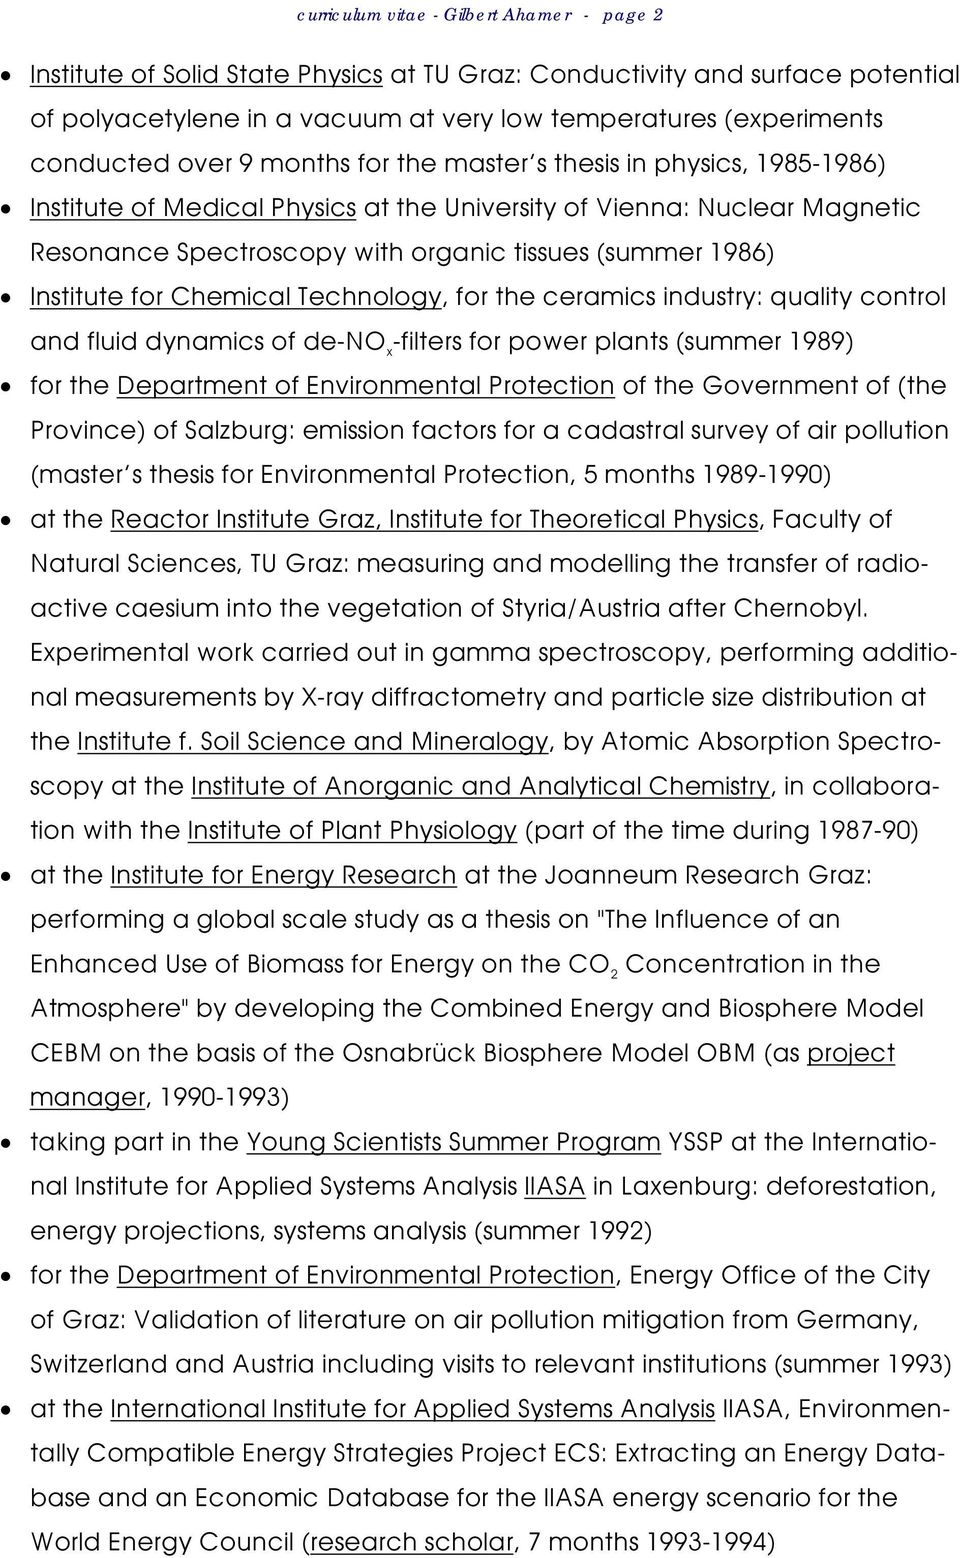 Institute for Chemical Technology, for the ceramics industry: quality control and fluid dynamics of de-no x -filters for power plants (summer 1989) for the Department of Environmental Protection of